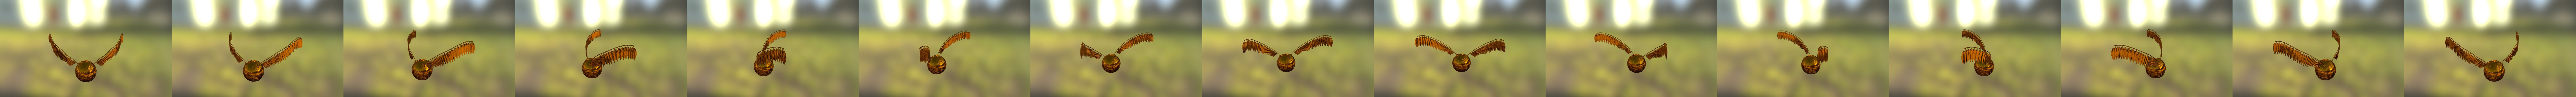 Golden Snitch. Harry Potter - 3D model by foxedfoxy (@foxedfoxy